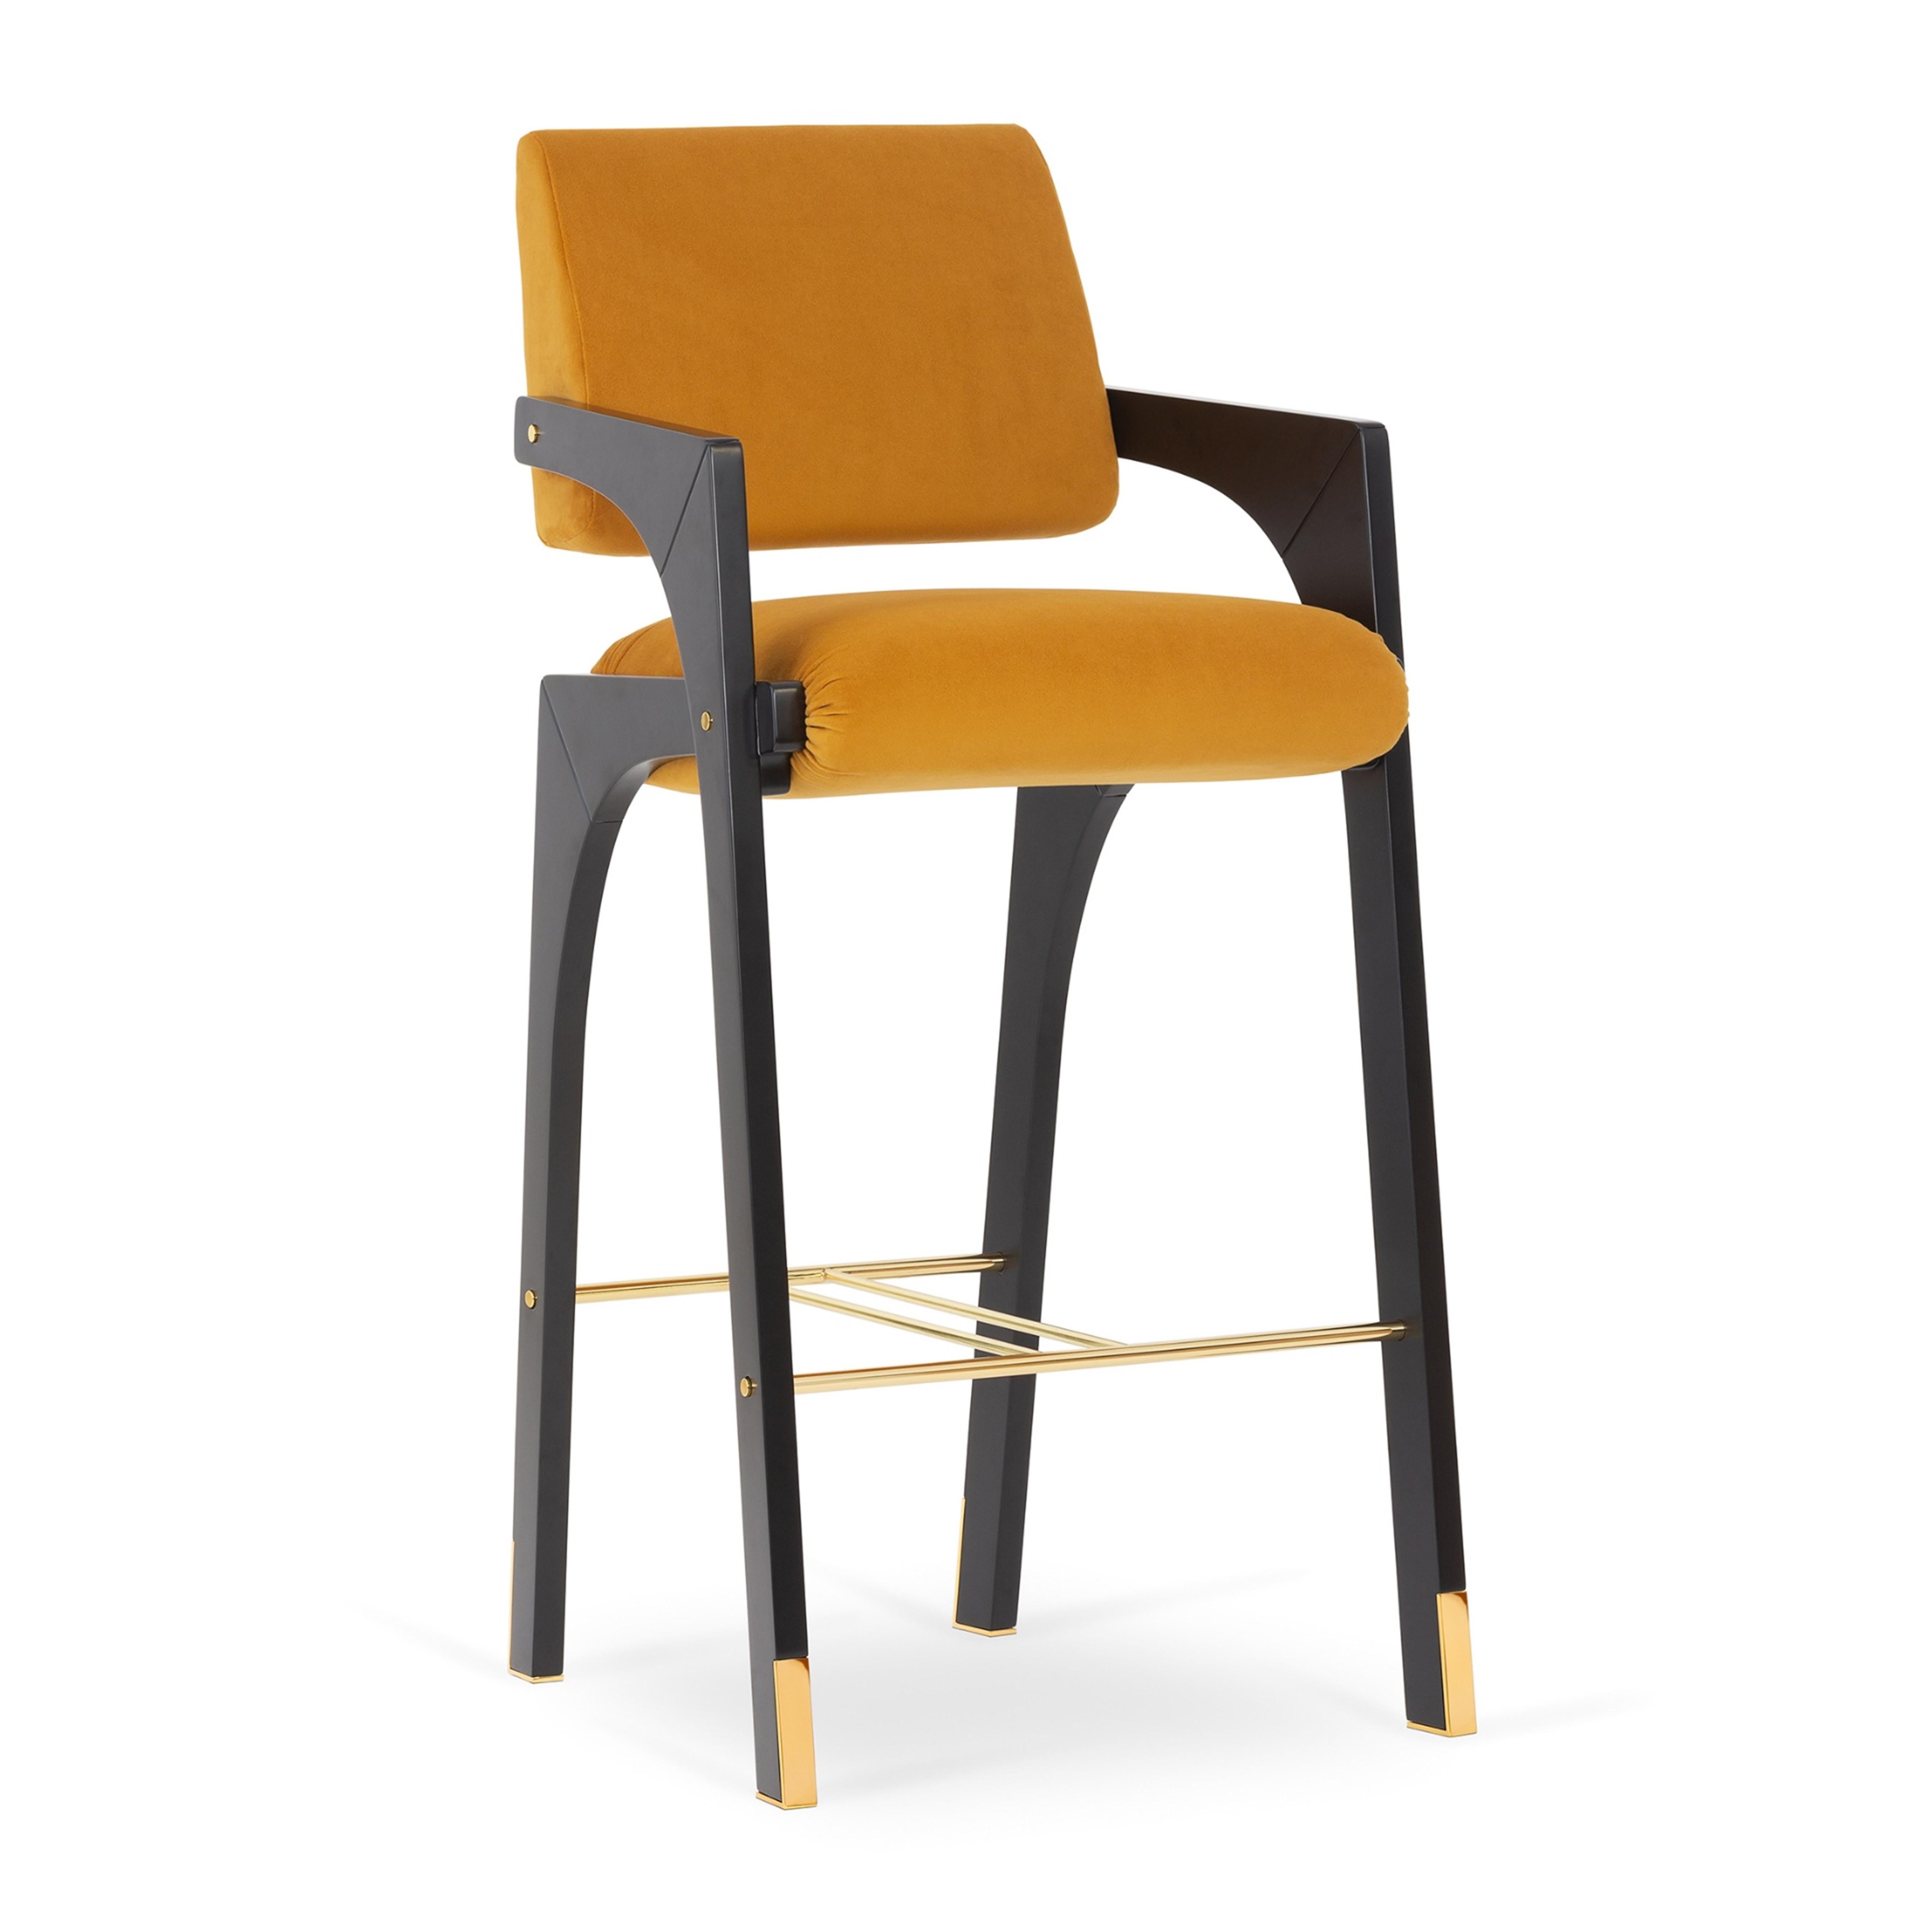 The Arches bar stool is designed in the likeness of the architectural scale that suggests a crossing through the structures of a utopian city, organized by the principles of symmetry and ideal forms.

The Arches bar stool is a redesign of the